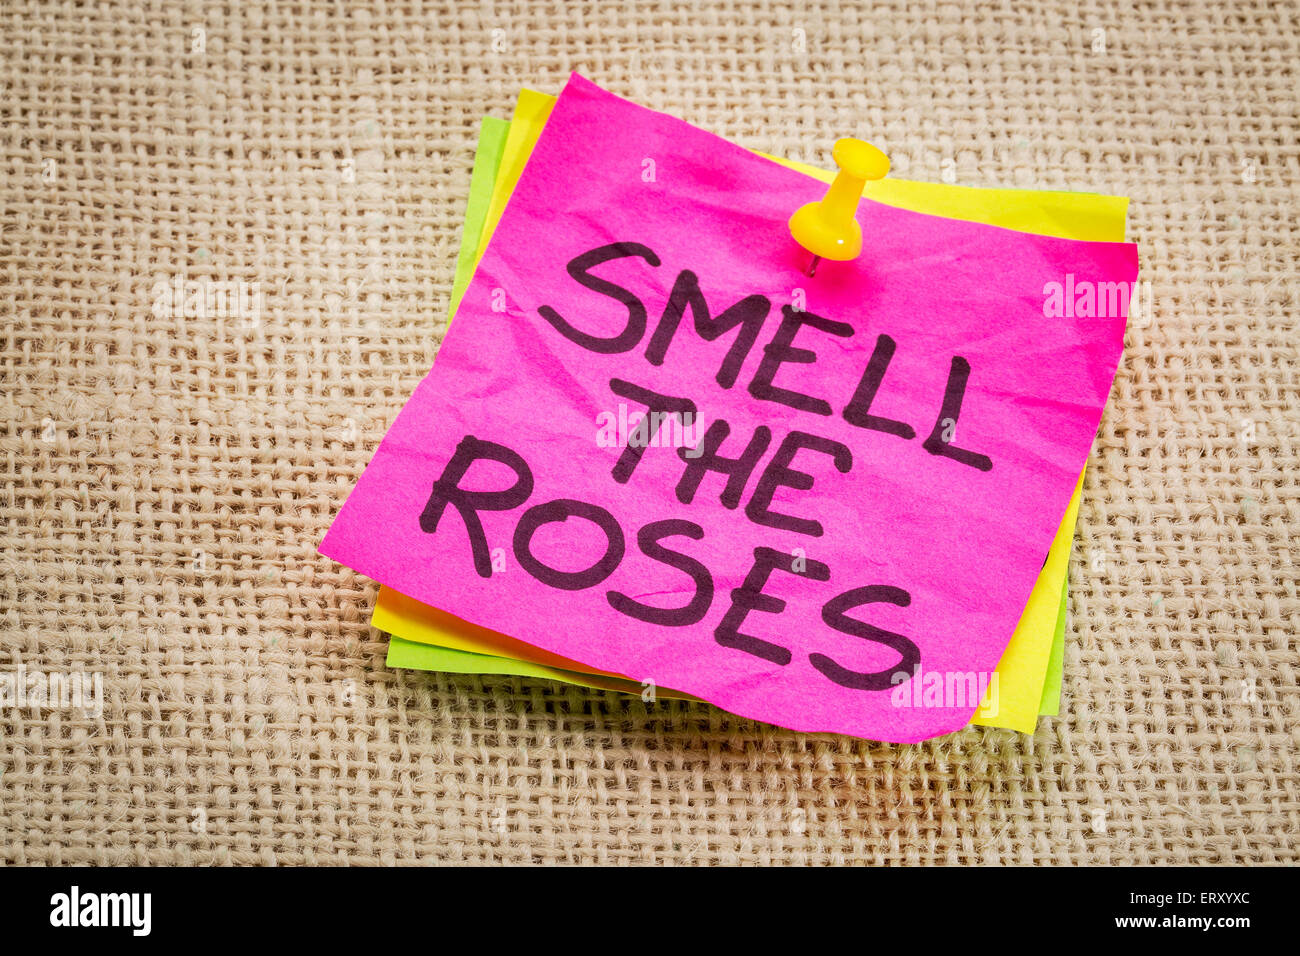 smell the roses - inspirational reminder on a sticky note against burlap canvas Stock Photo